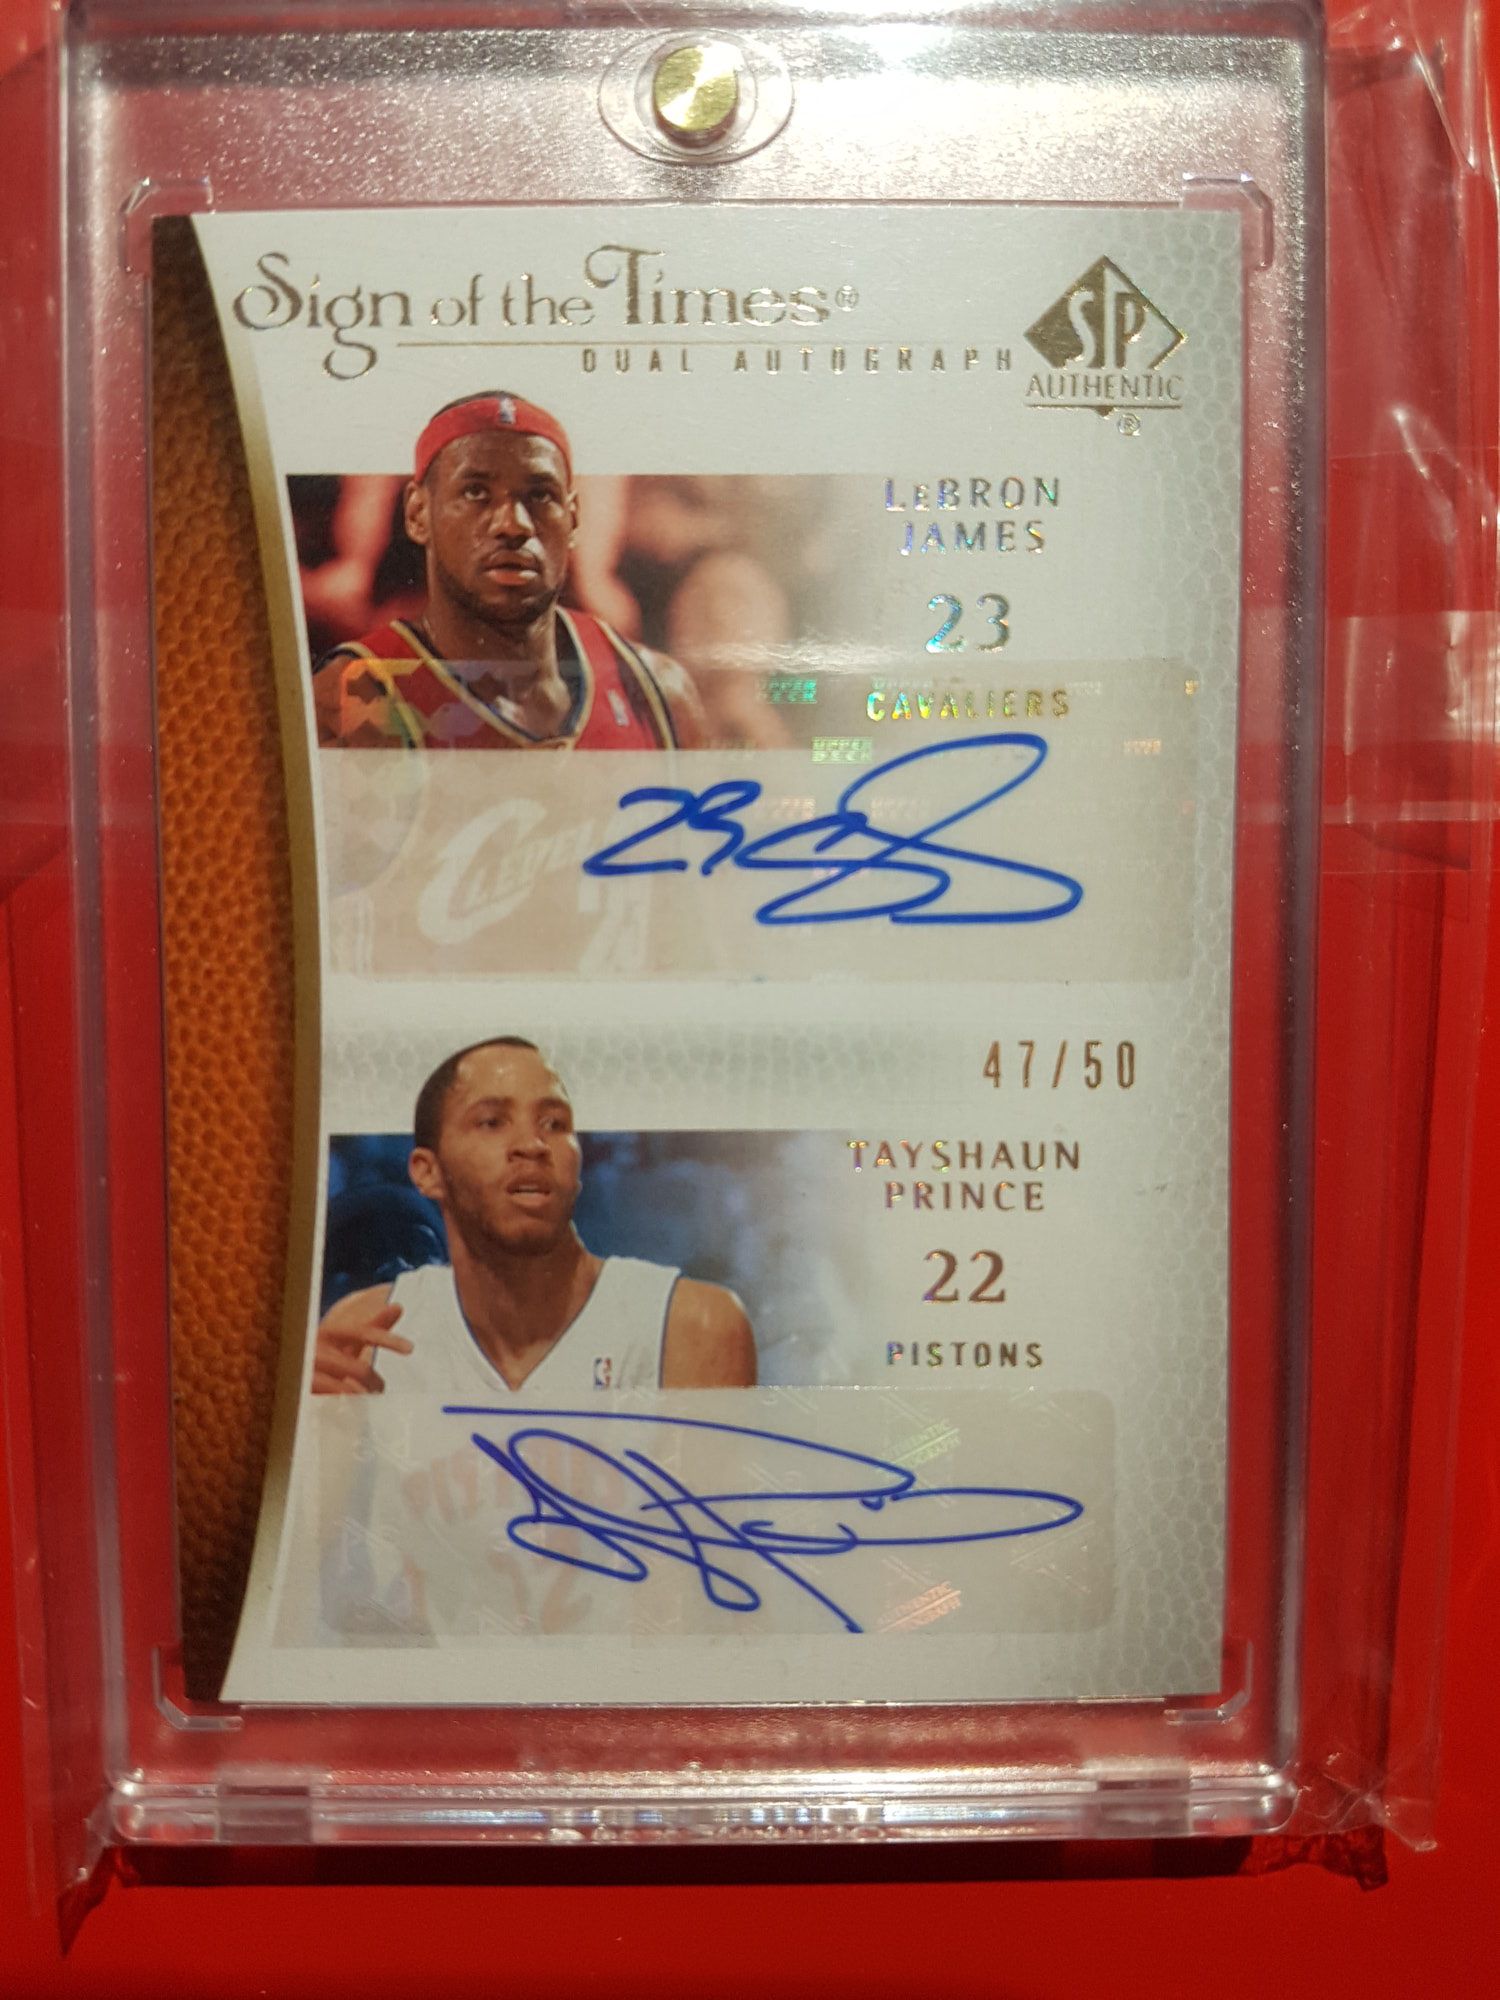 2007-08 SP Authentic - Sign of the Times Dual LeBron James, Tayshaun Prince 47-50.jpg